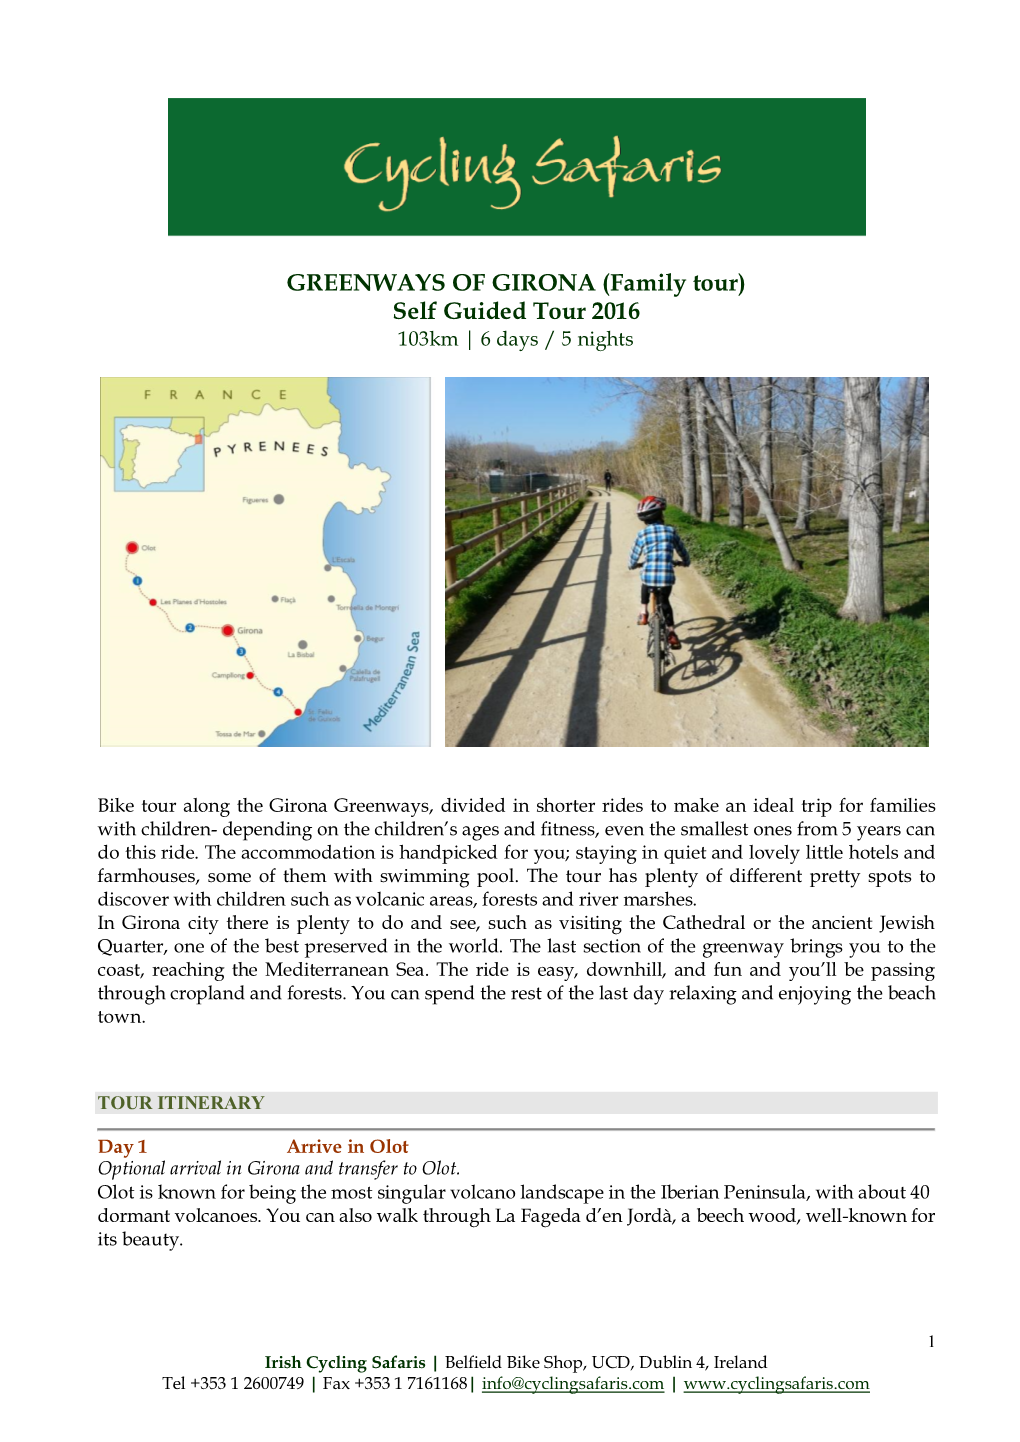 GREENWAYS of GIRONA (Family Tour) Self Guided Tour 2016 103Km | 6 Days / 5 Nights